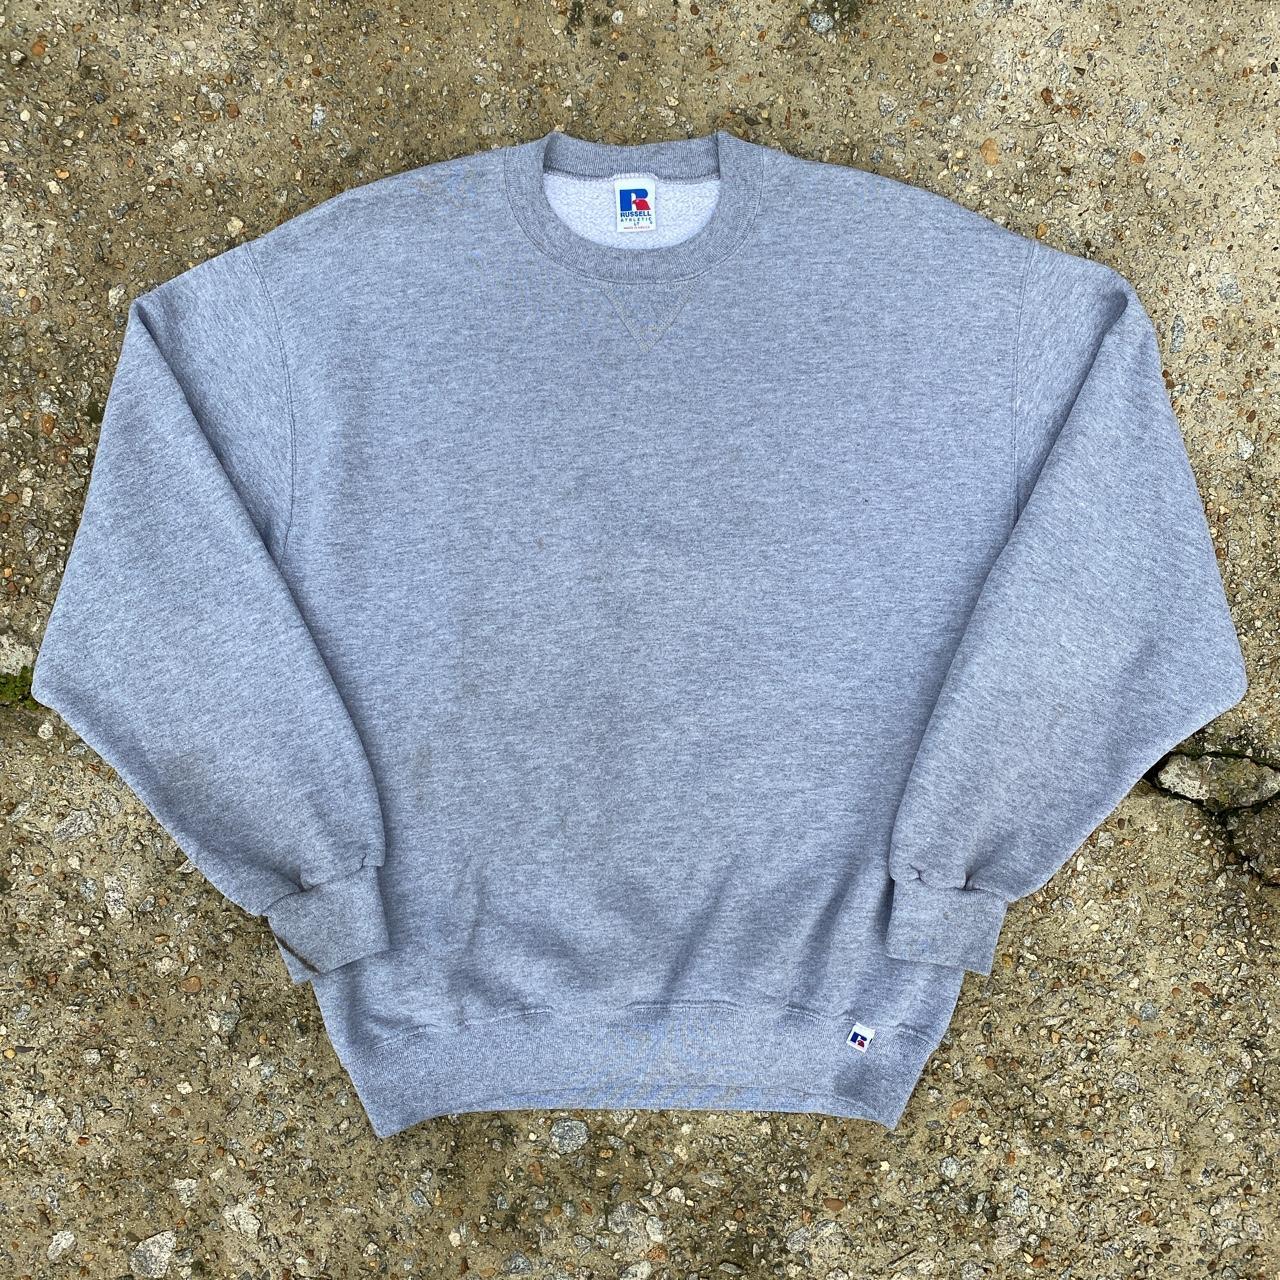 Russell Athletic Men's Grey and White Sweatshirt (4)